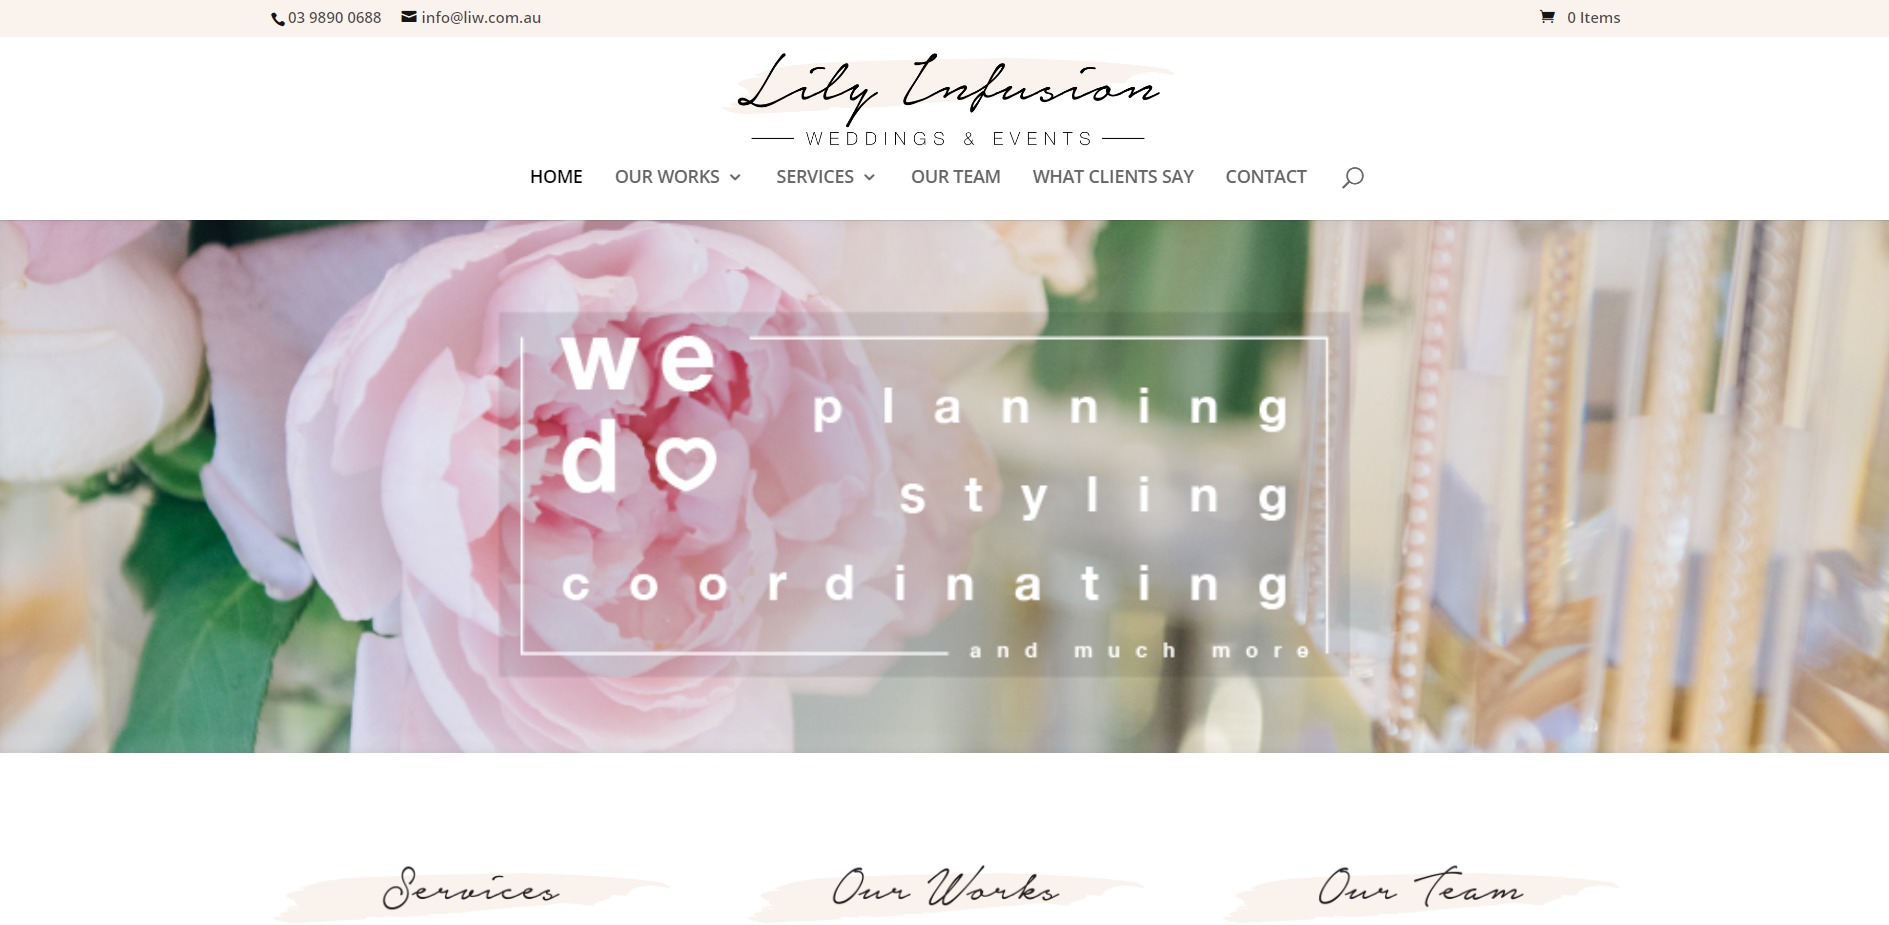 Lily Infusion Weddings & Events